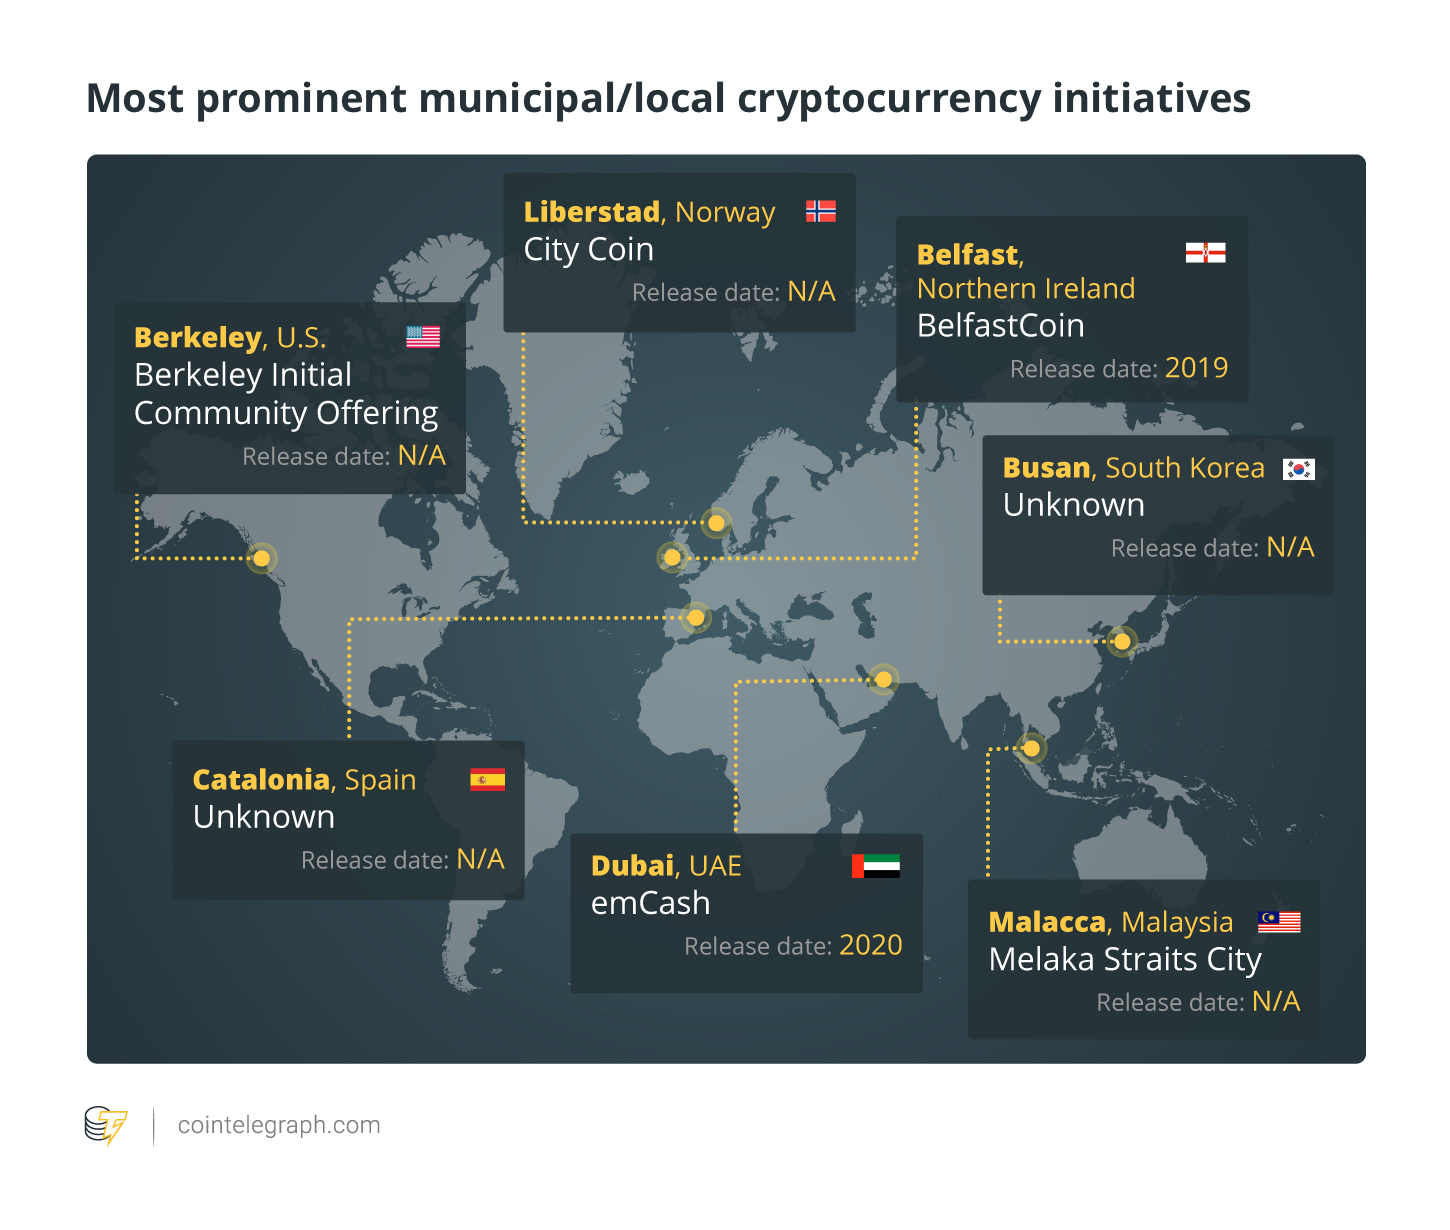 Most prominent municipal/local cryptocurrency initiatives